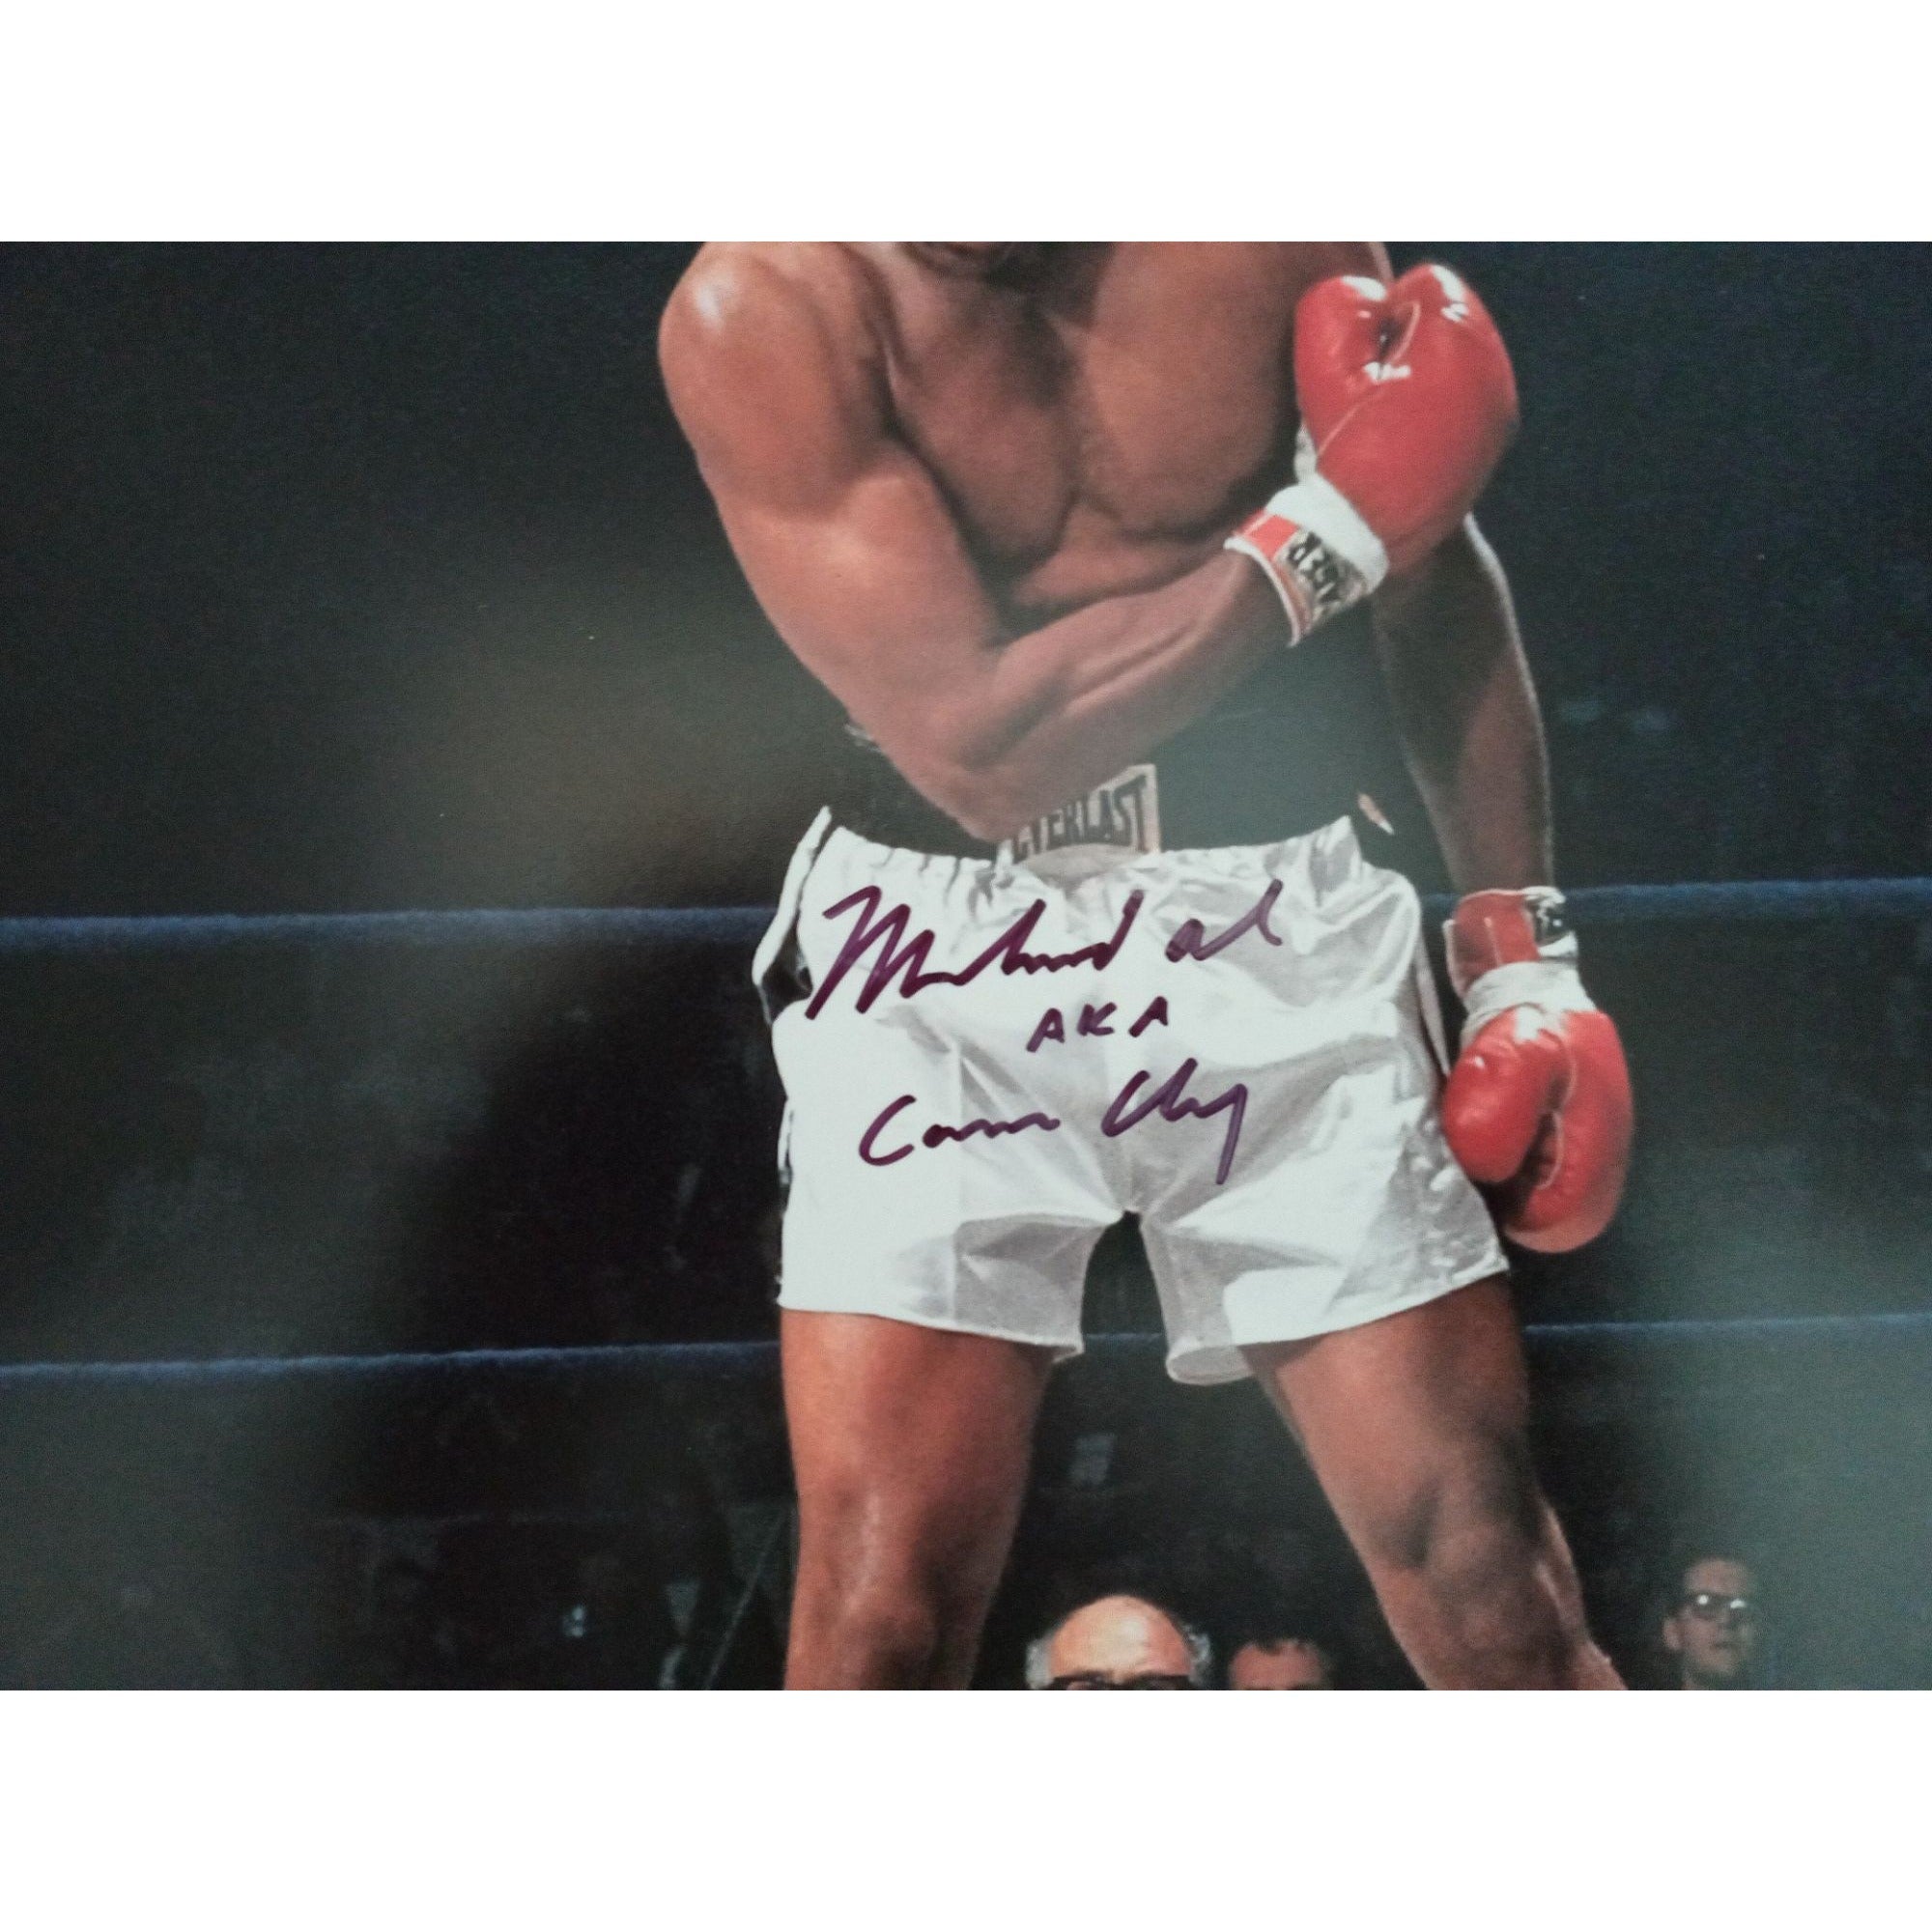 Muhammad Ali Cassius Clay 16 x 20 photo signed with proof